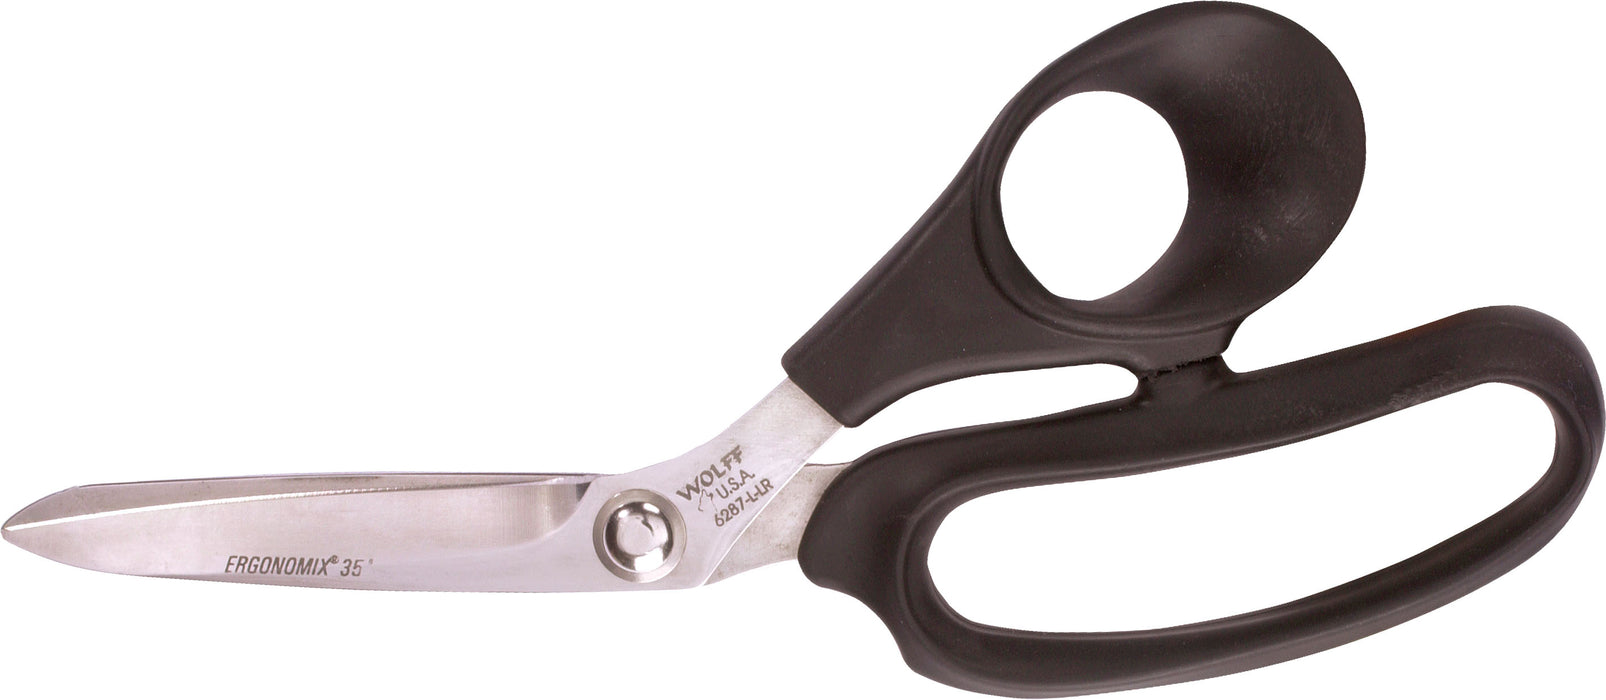 Wolff® 6287-L-LR 9" Ergonomix® Poultry Scissors - 6000 Series Stainless Steel Shears